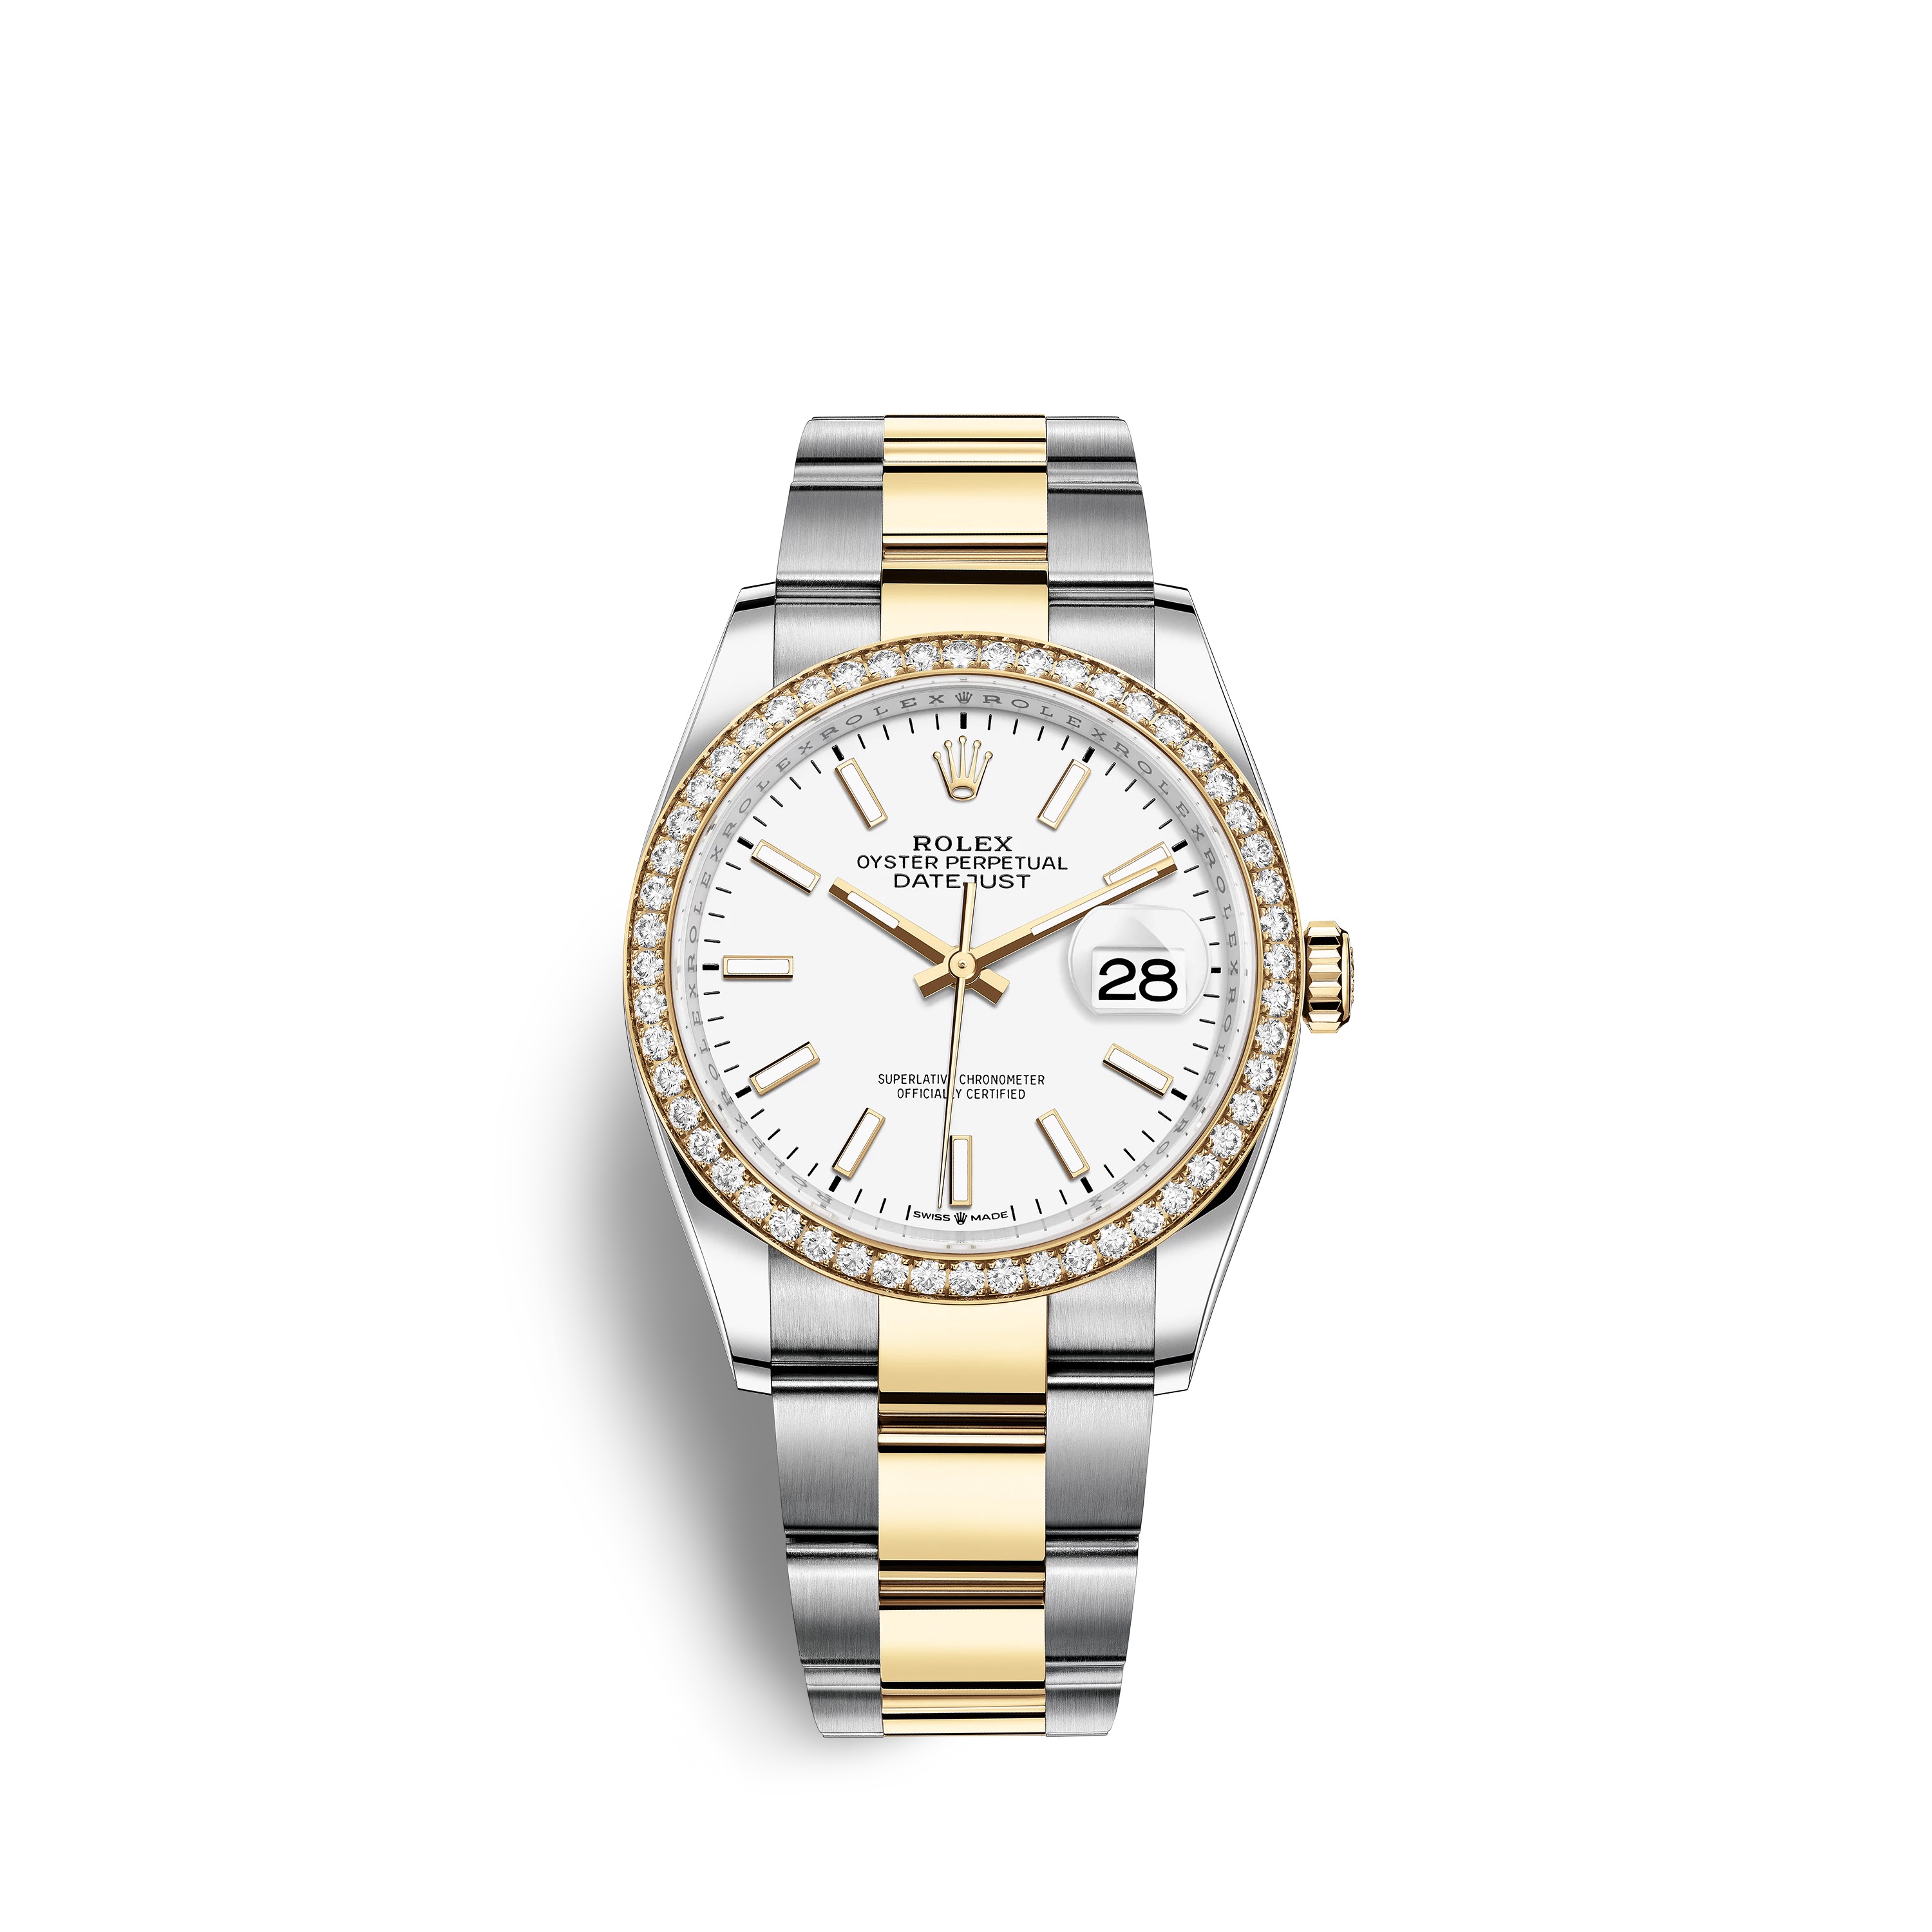 Datejust 36 126283RBR Gold & Stainless Steel Watch (White)